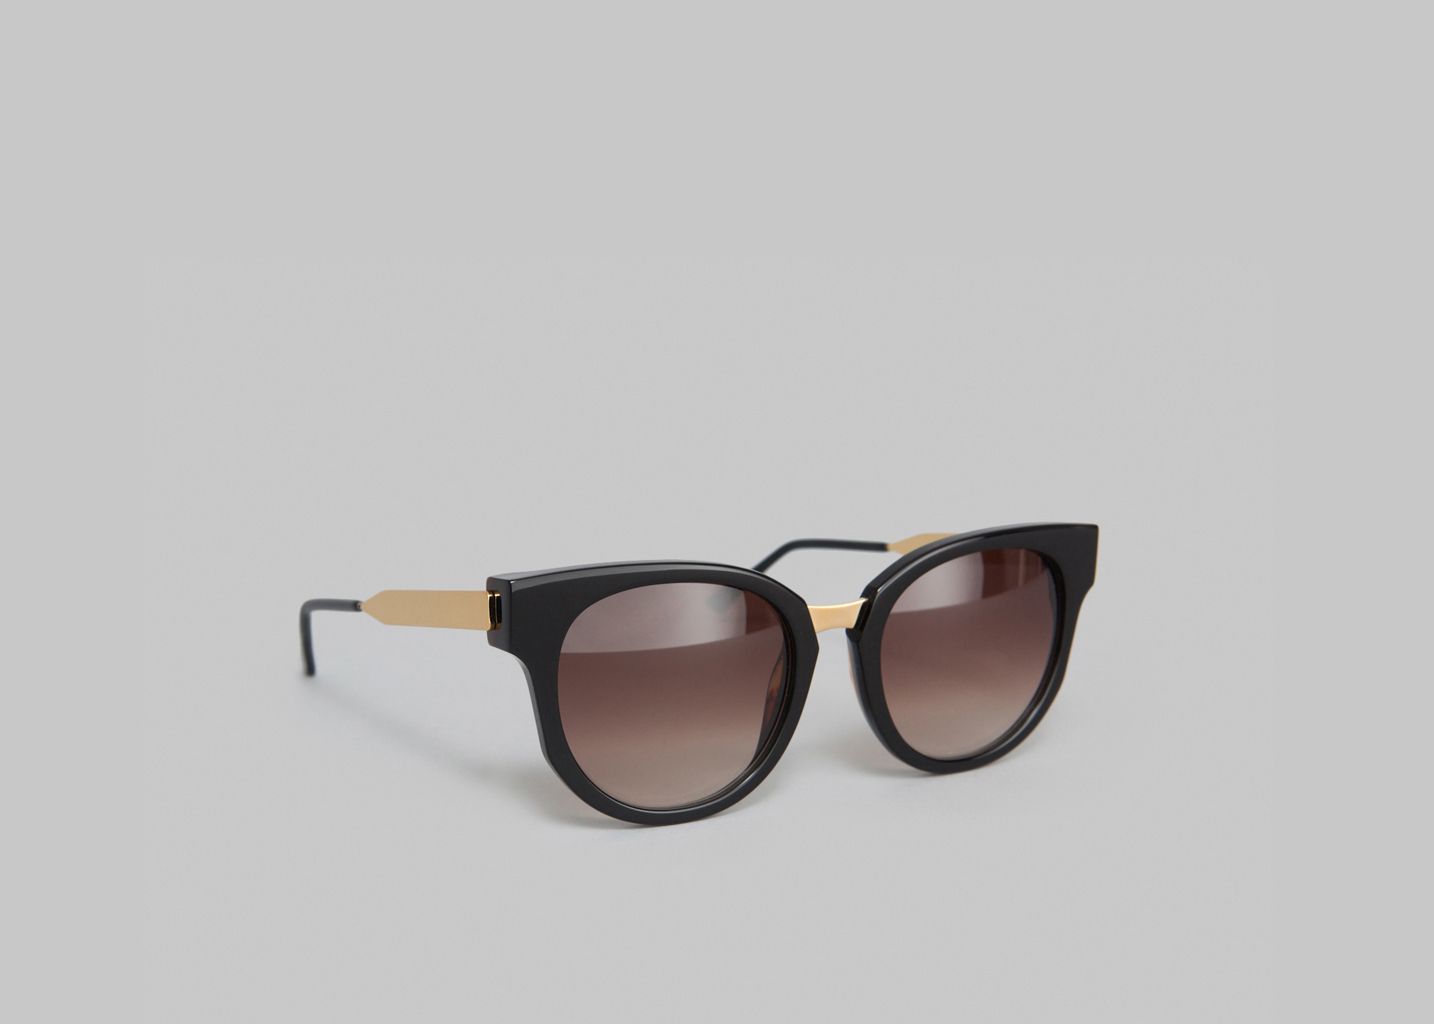 Snobby Suglasses - Thierry Lasry